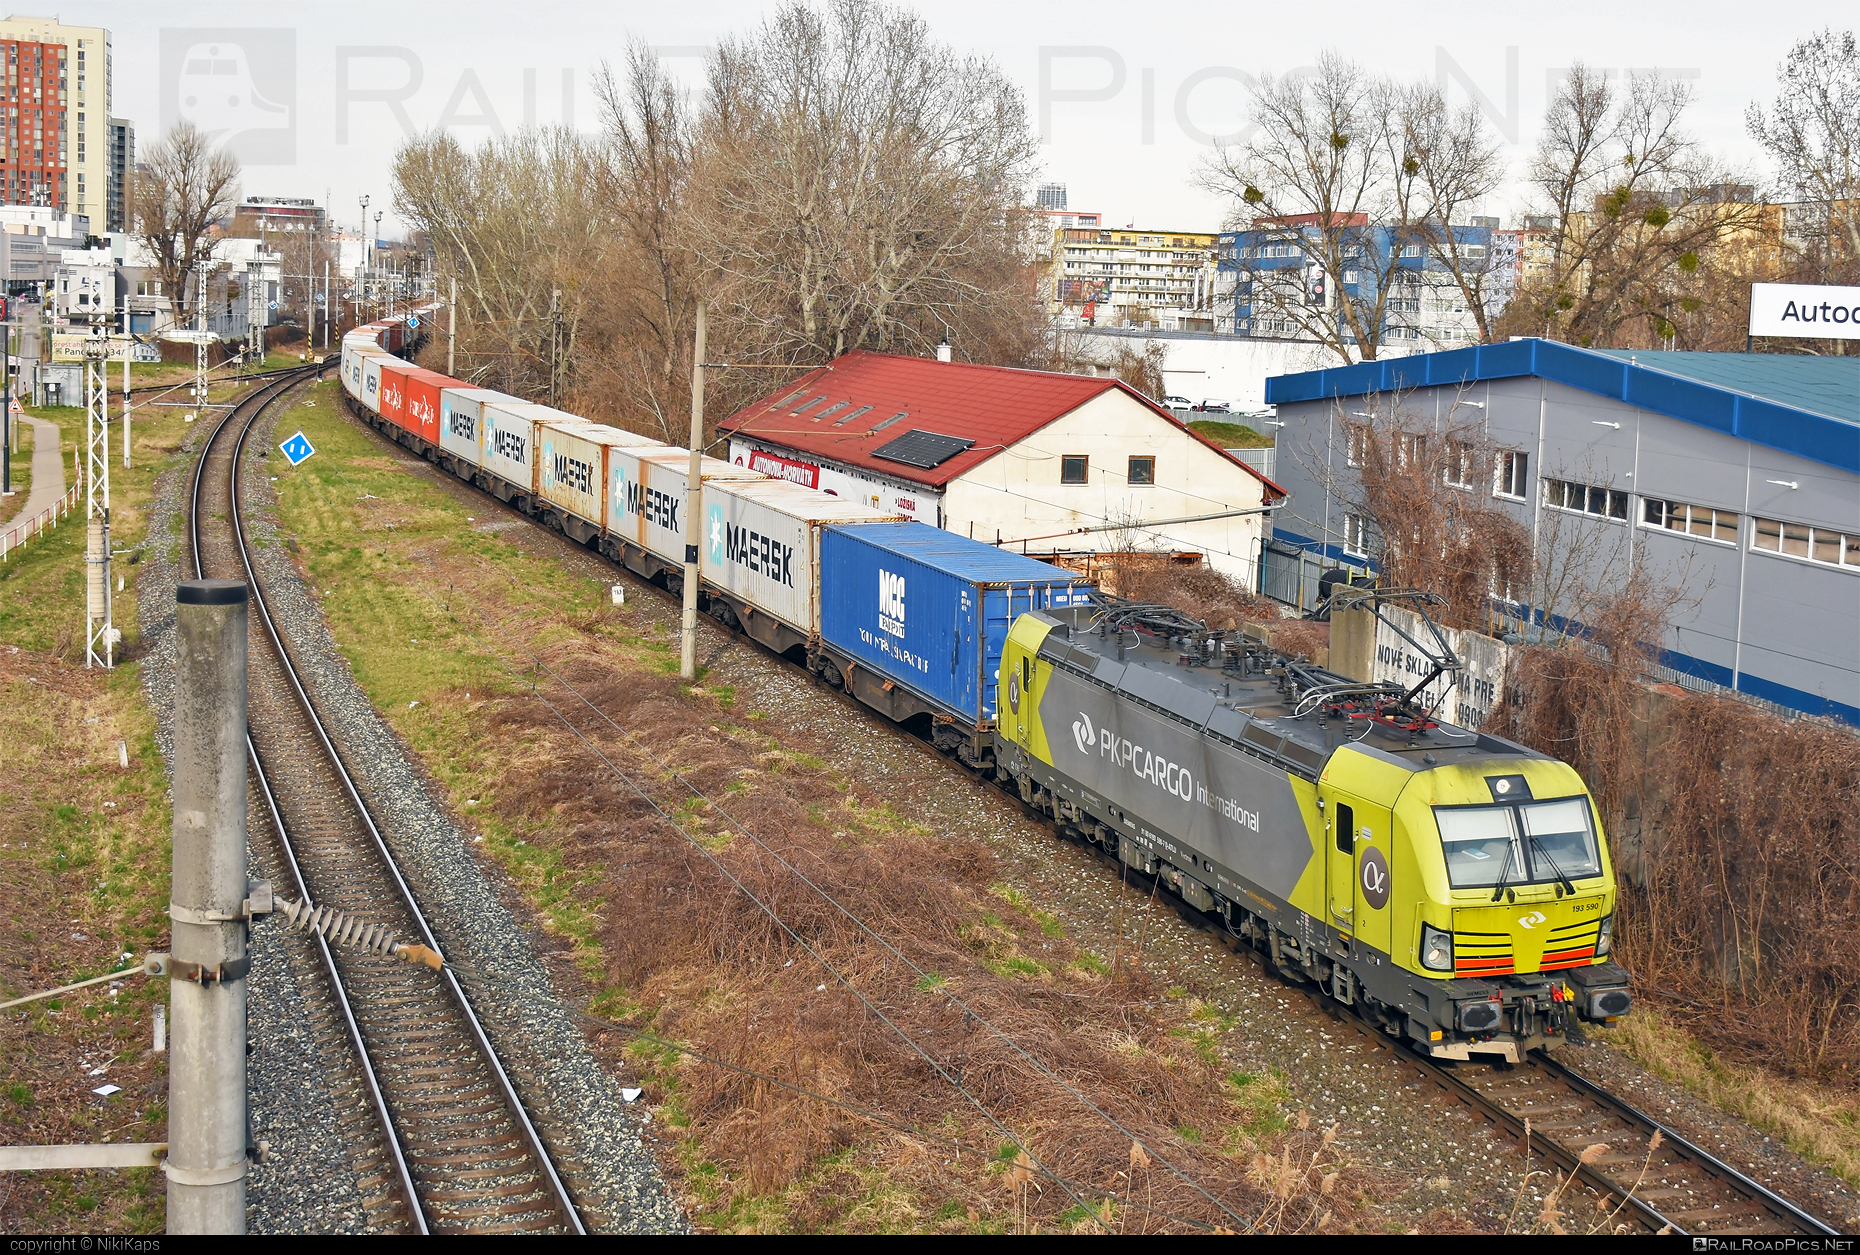 Siemens Vectron MS - 193 590 operated by PKP CARGO INTERNATIONAL a.s. #alphatrainsluxembourg #container #flatwagon #maersk #pkpcargointernational #pkpcargointernationalas #siemens #siemensVectron #siemensVectronMS #vectron #vectronMS